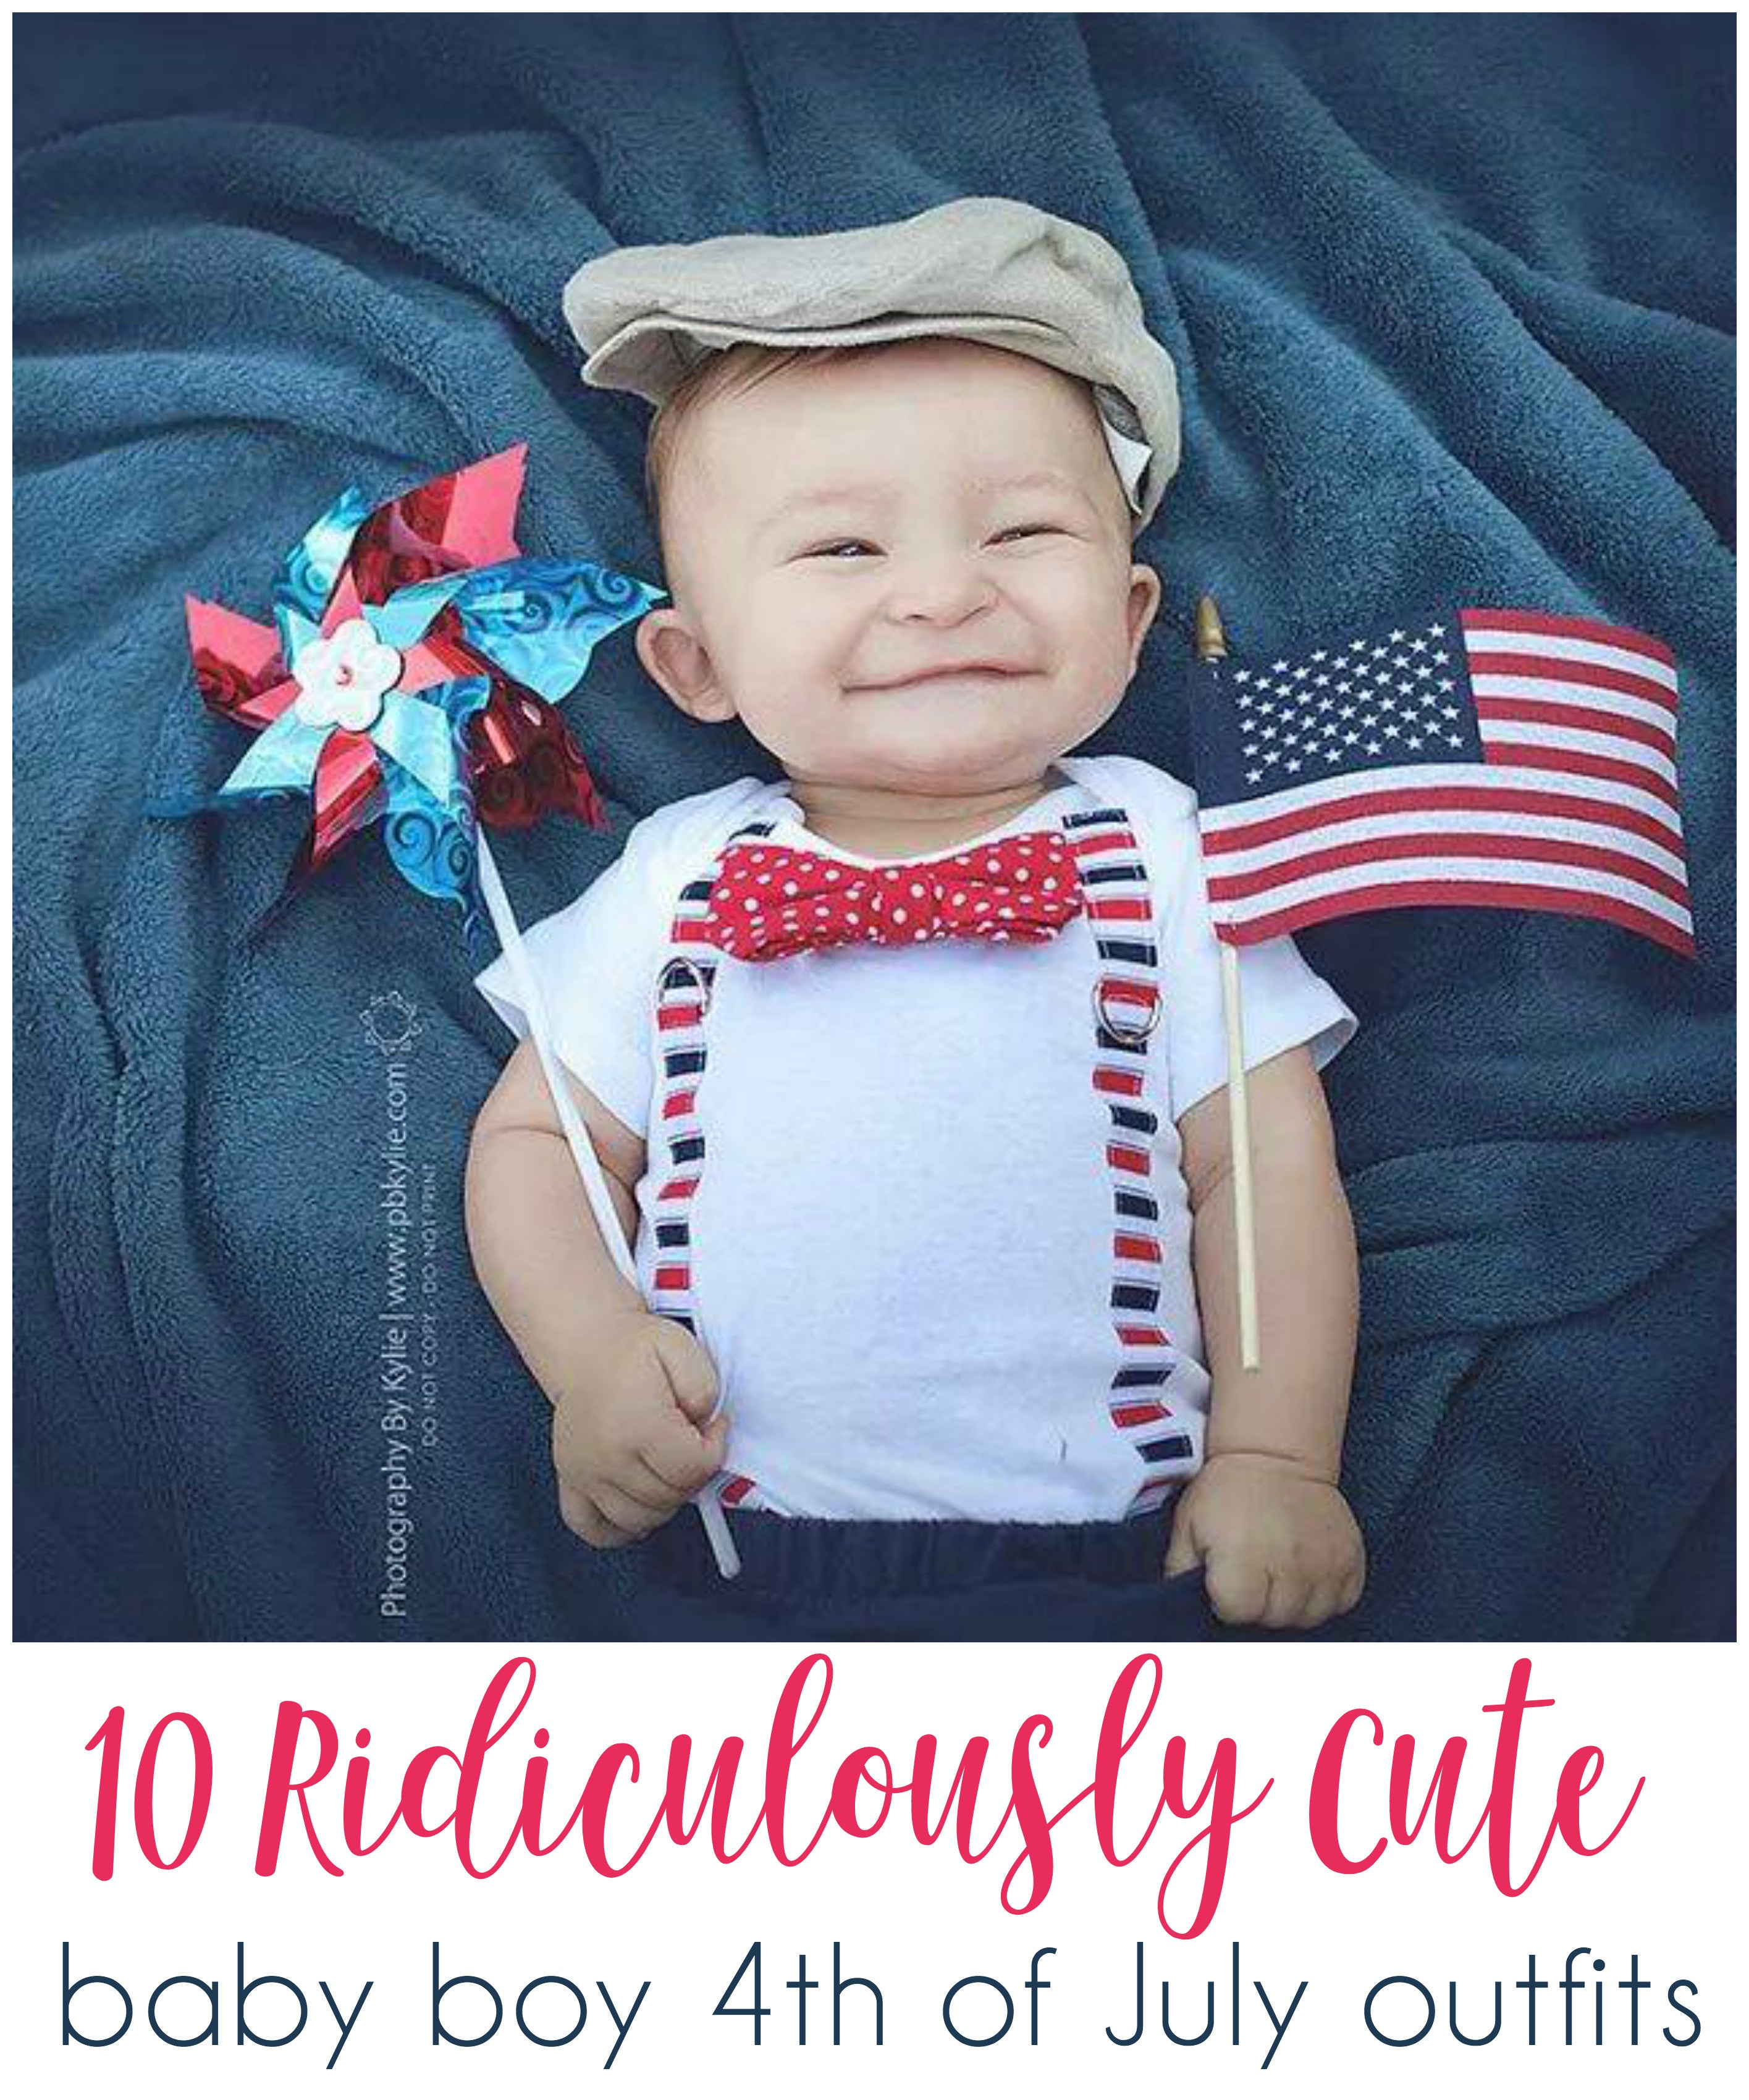 10 (Ridiculously Cute) Baby Boy 4th of 